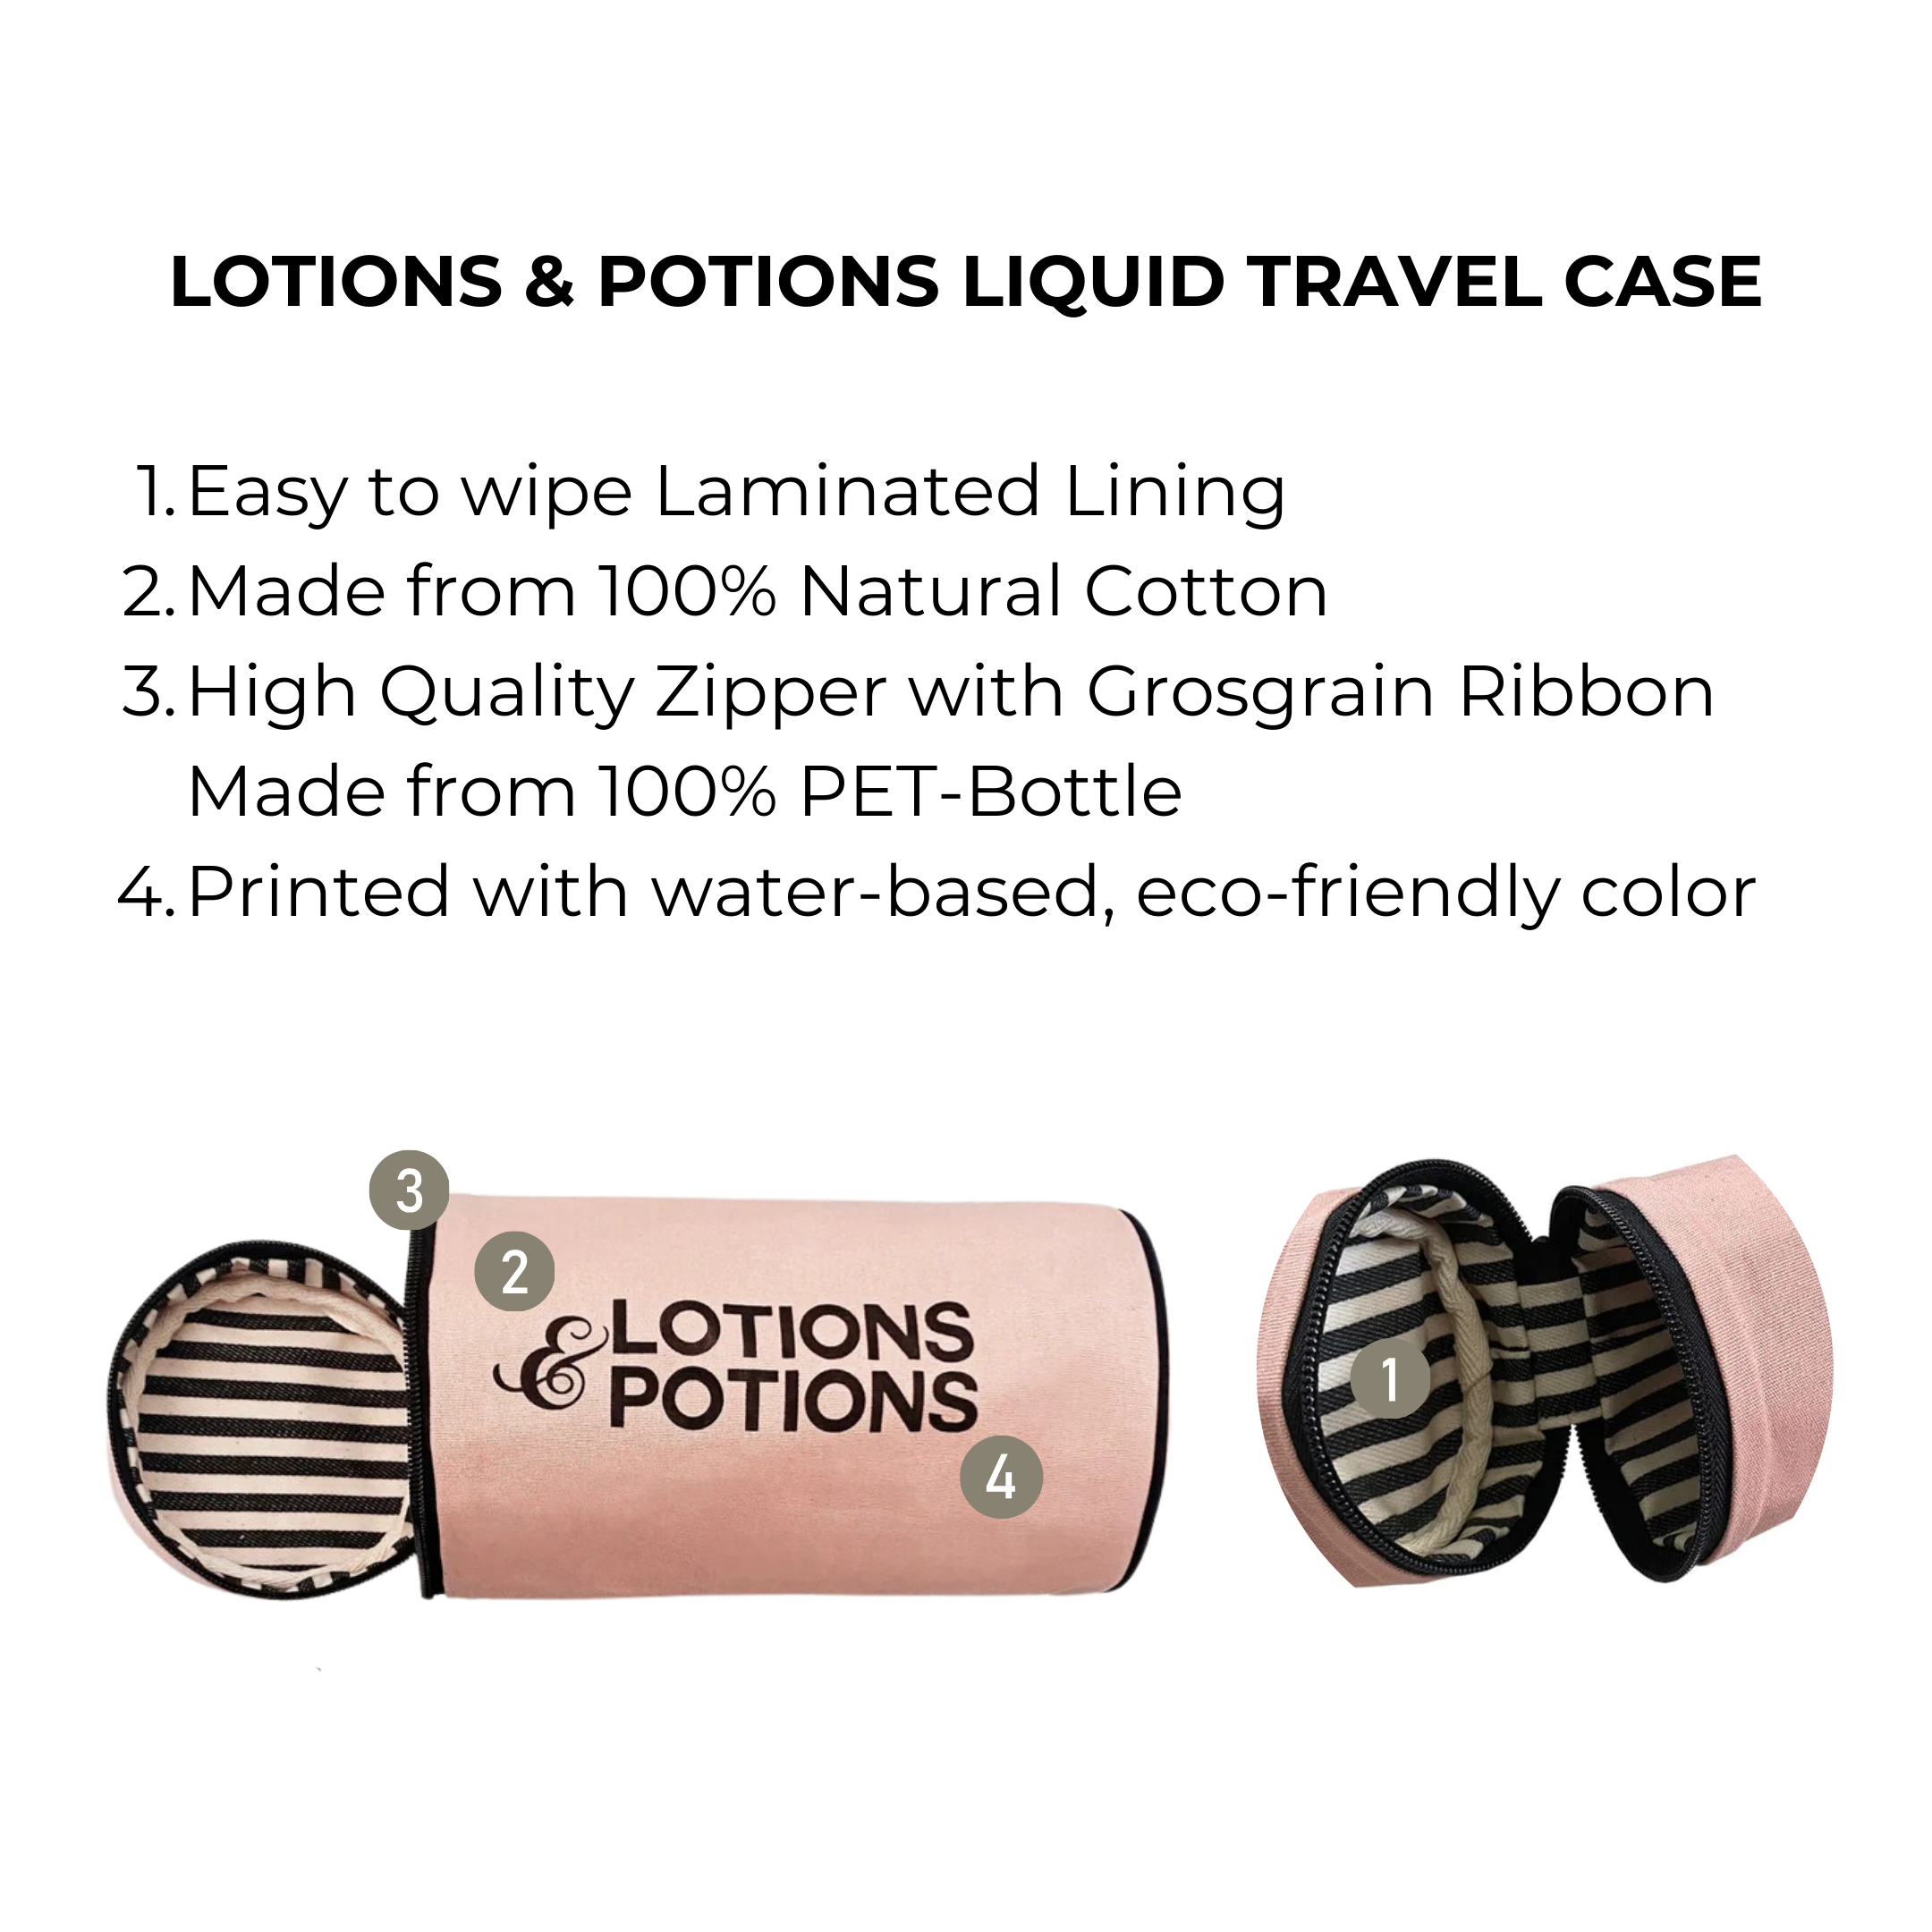 Lotions & Potions, Liquid Travel Case, Pink/Blush | Bag-all